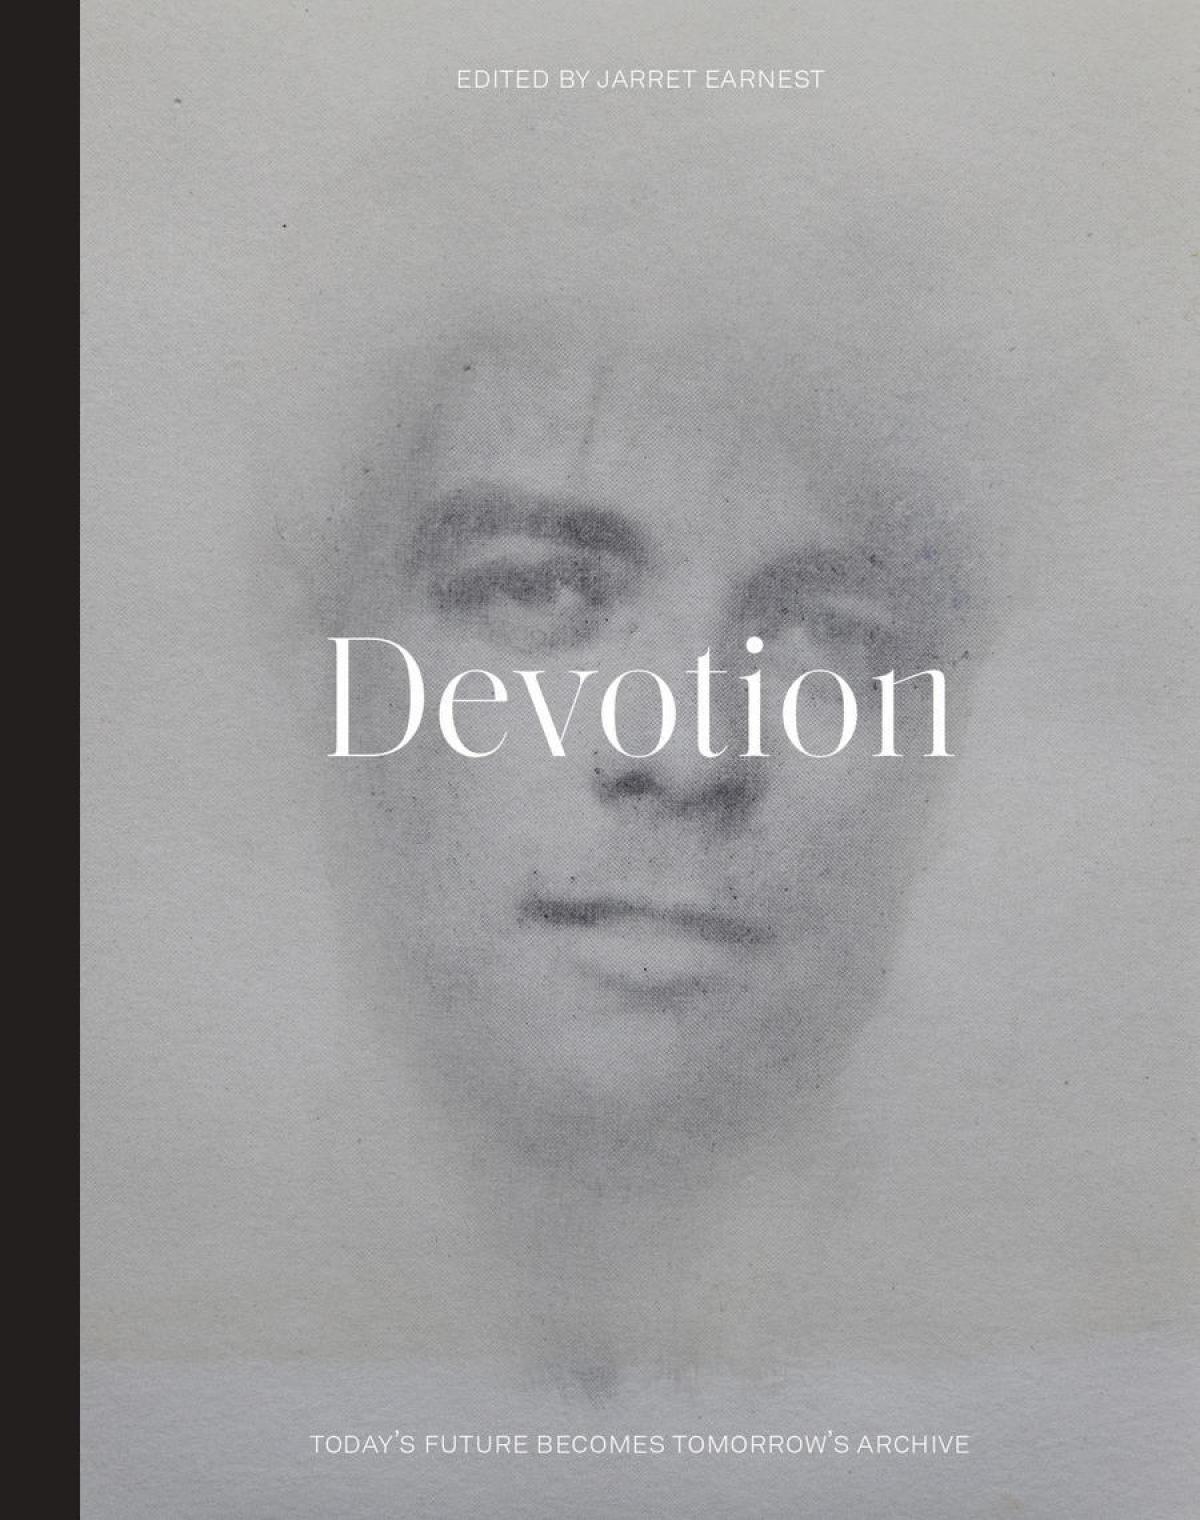 Faded black and white sketch of a man's face with the text "Devotion" in white font overtop. "Edited by Jarrett Earnest" is written across the top and "Today's Future Becomes Tomorrow's Archive" is across the bottom.